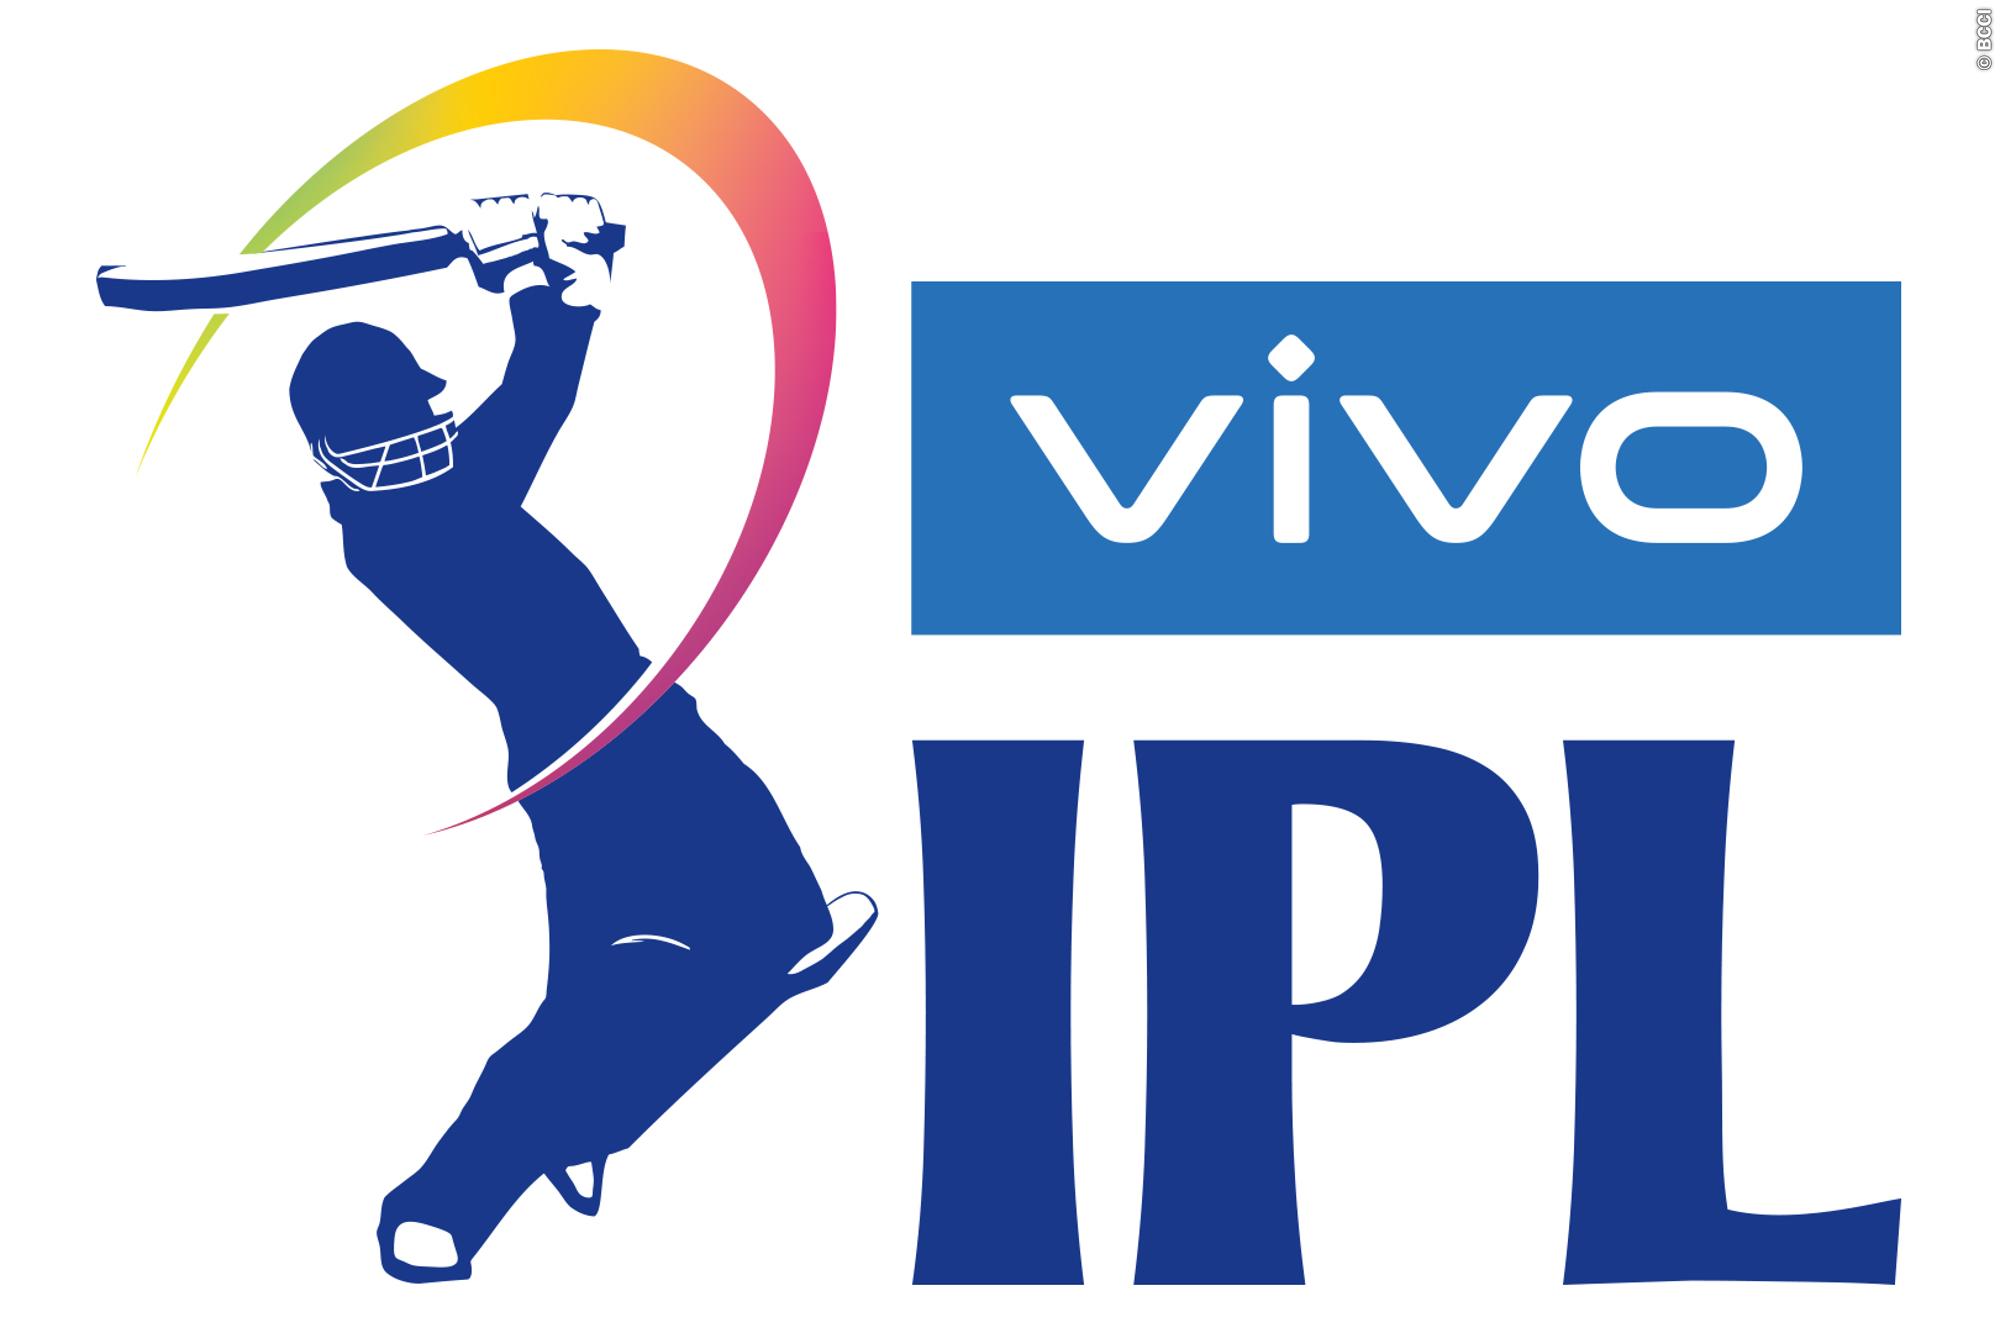 IPLT20 Final match of 17 matches - these two teams will play first match (2)